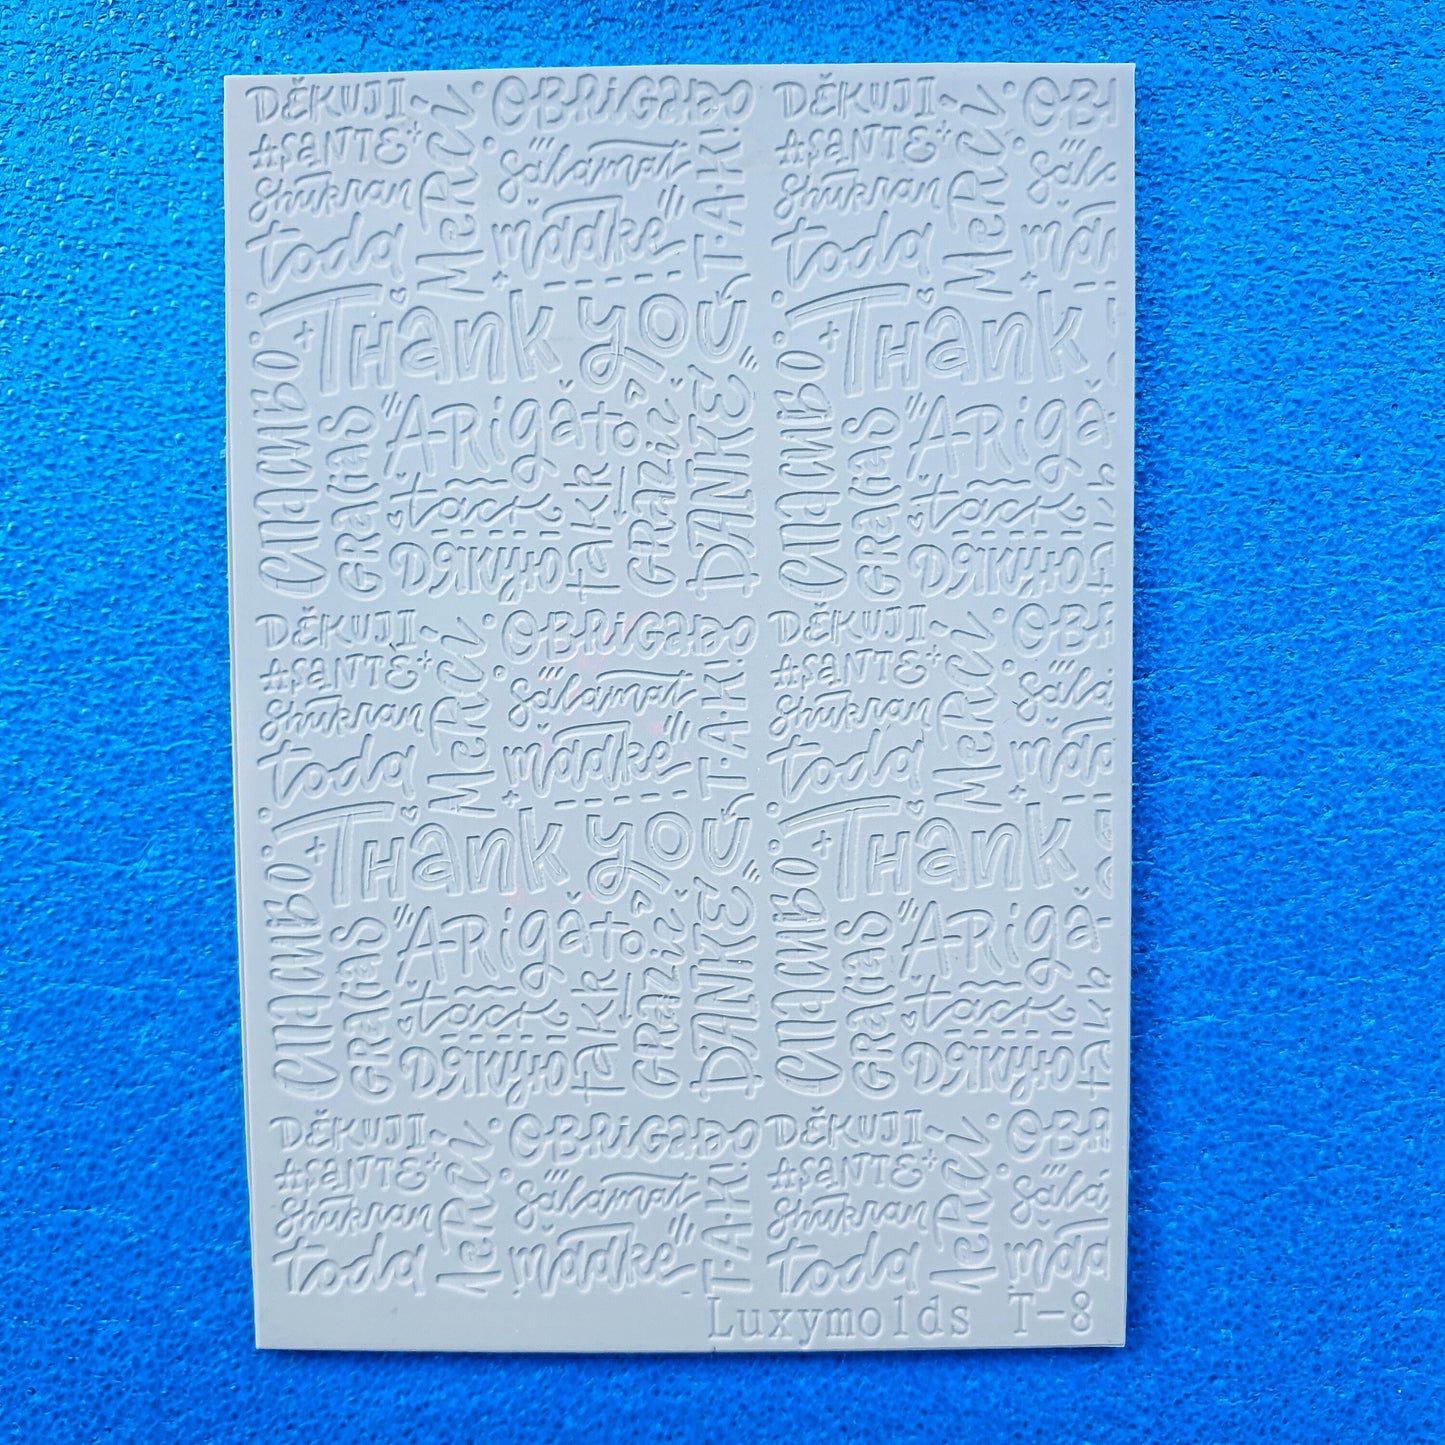 Polymer clay Texture tile Texture mat Clay stamp Polymer clay texture stencils "Thanks" T-8